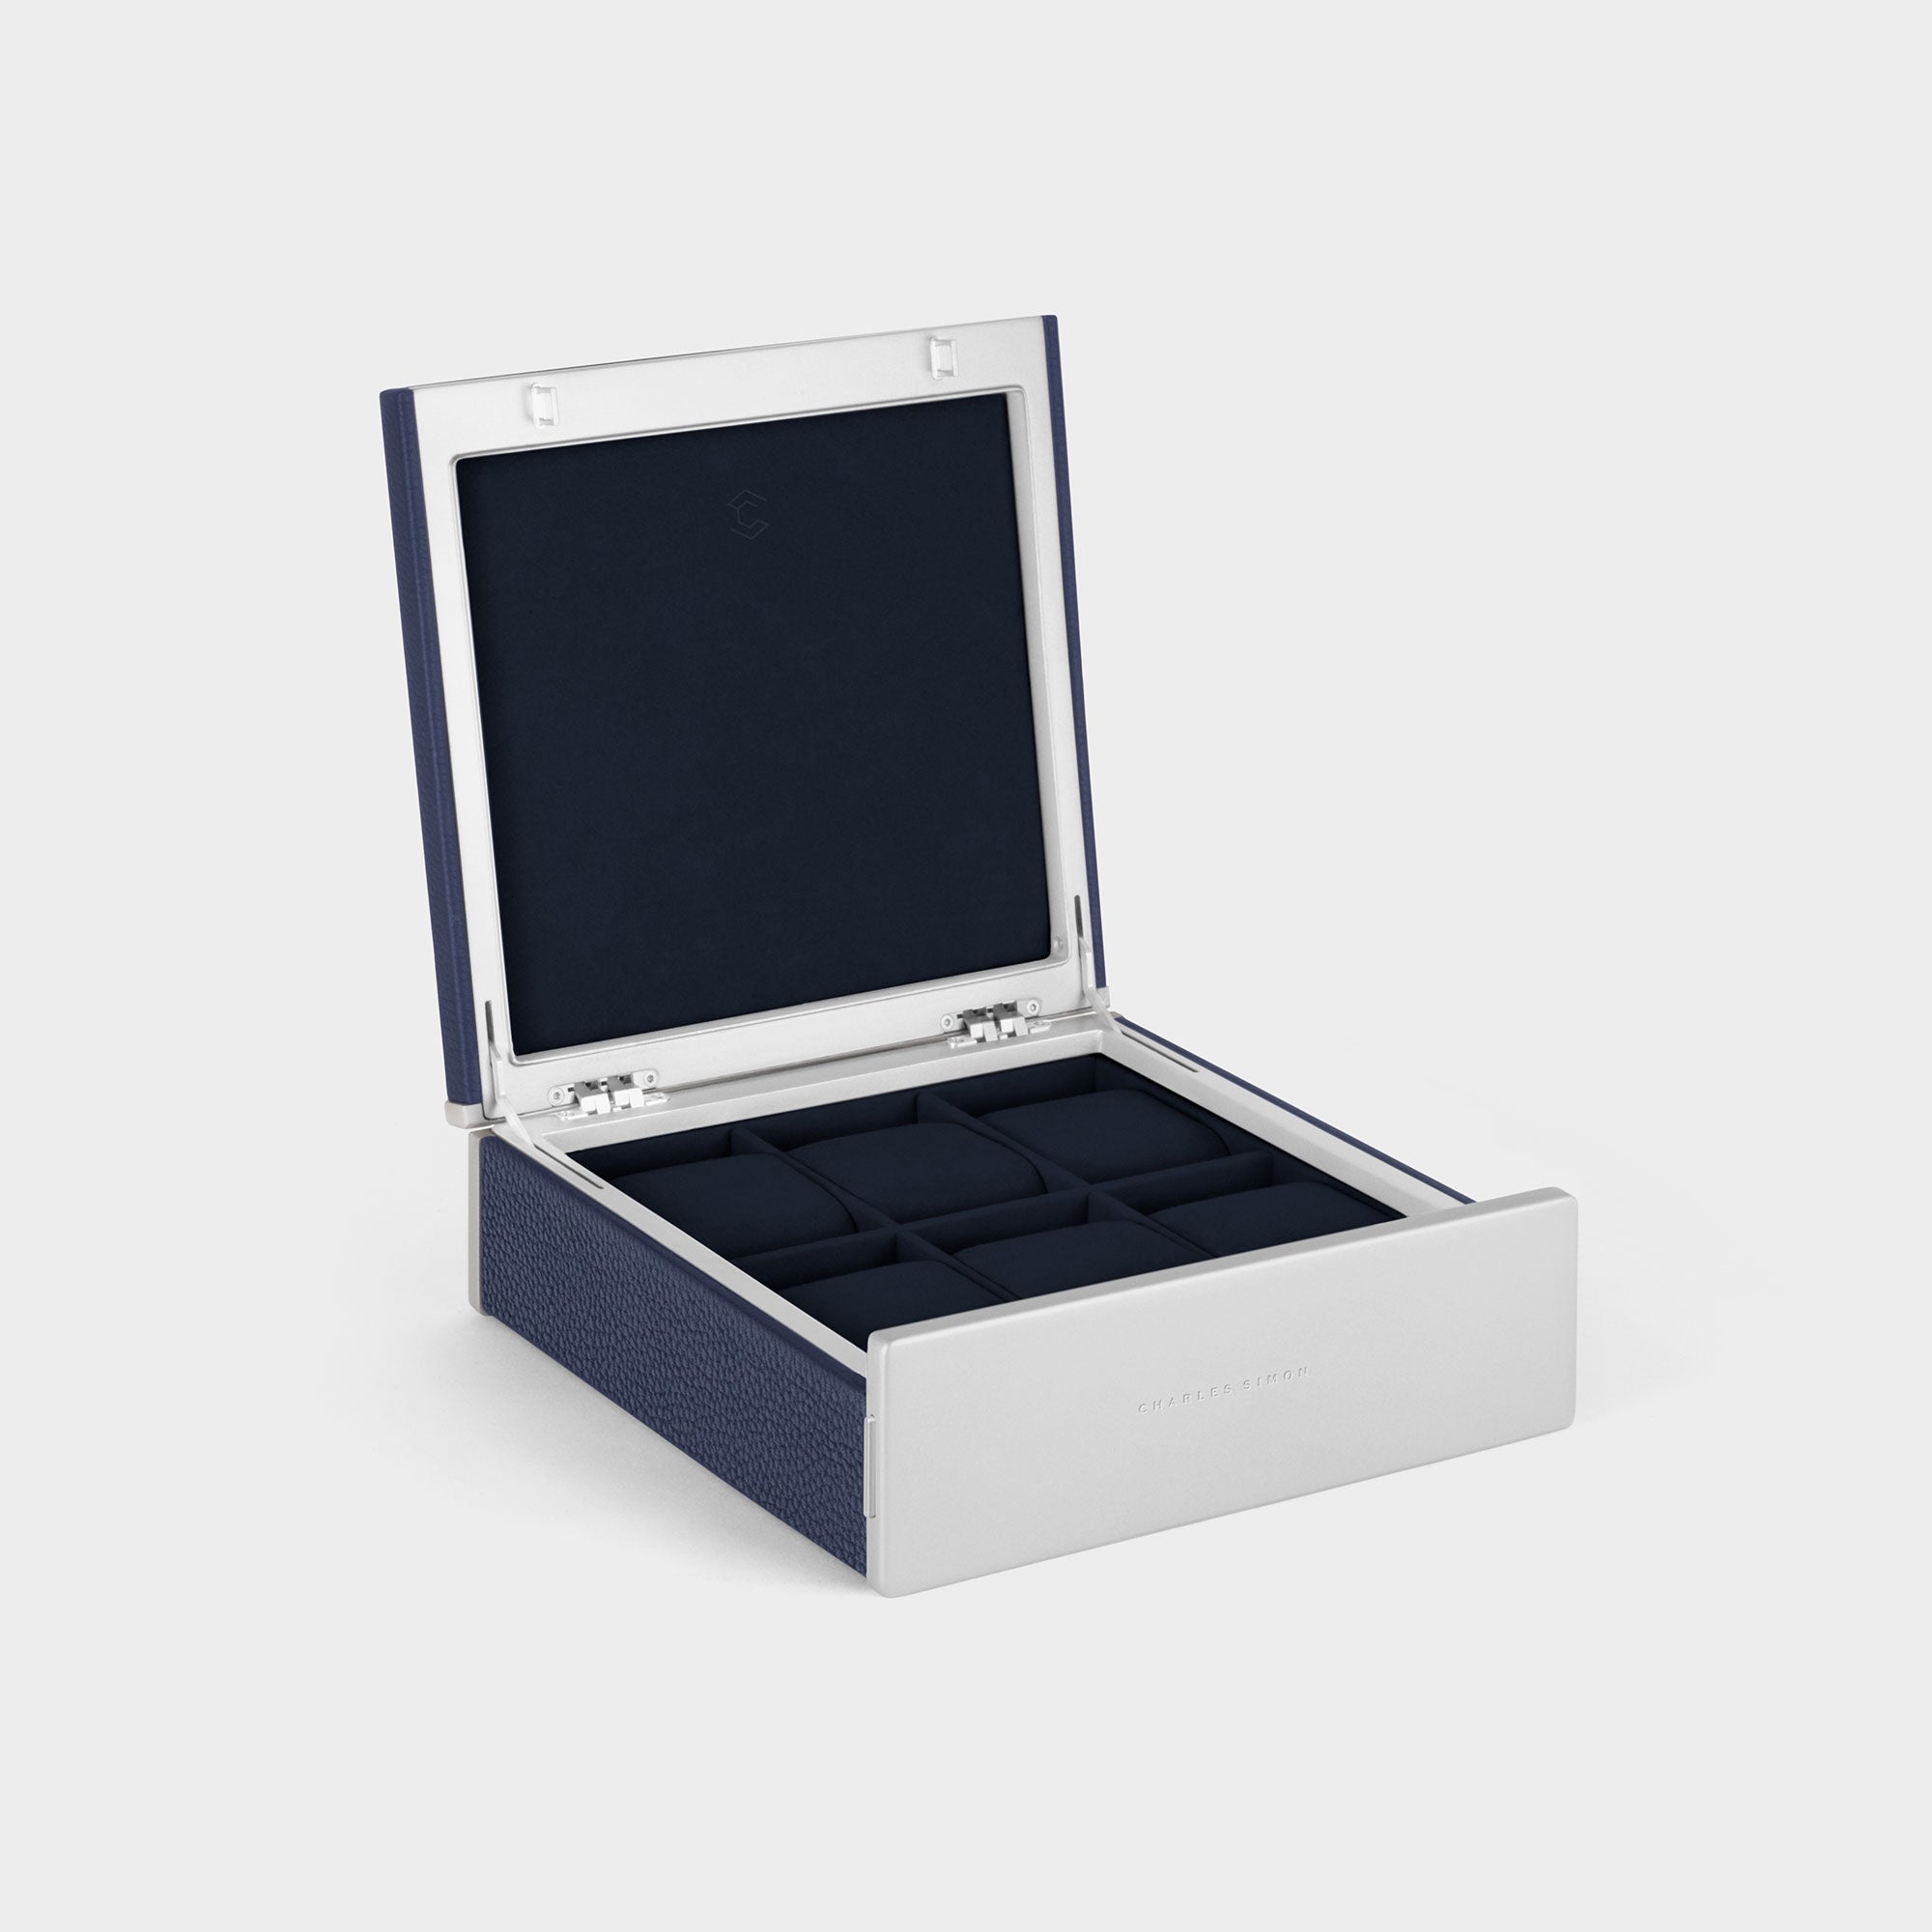 Handmade watch box for 6 watches in sapphire leather, carbon fiber and anodized aluminum casing and Alcantara interior